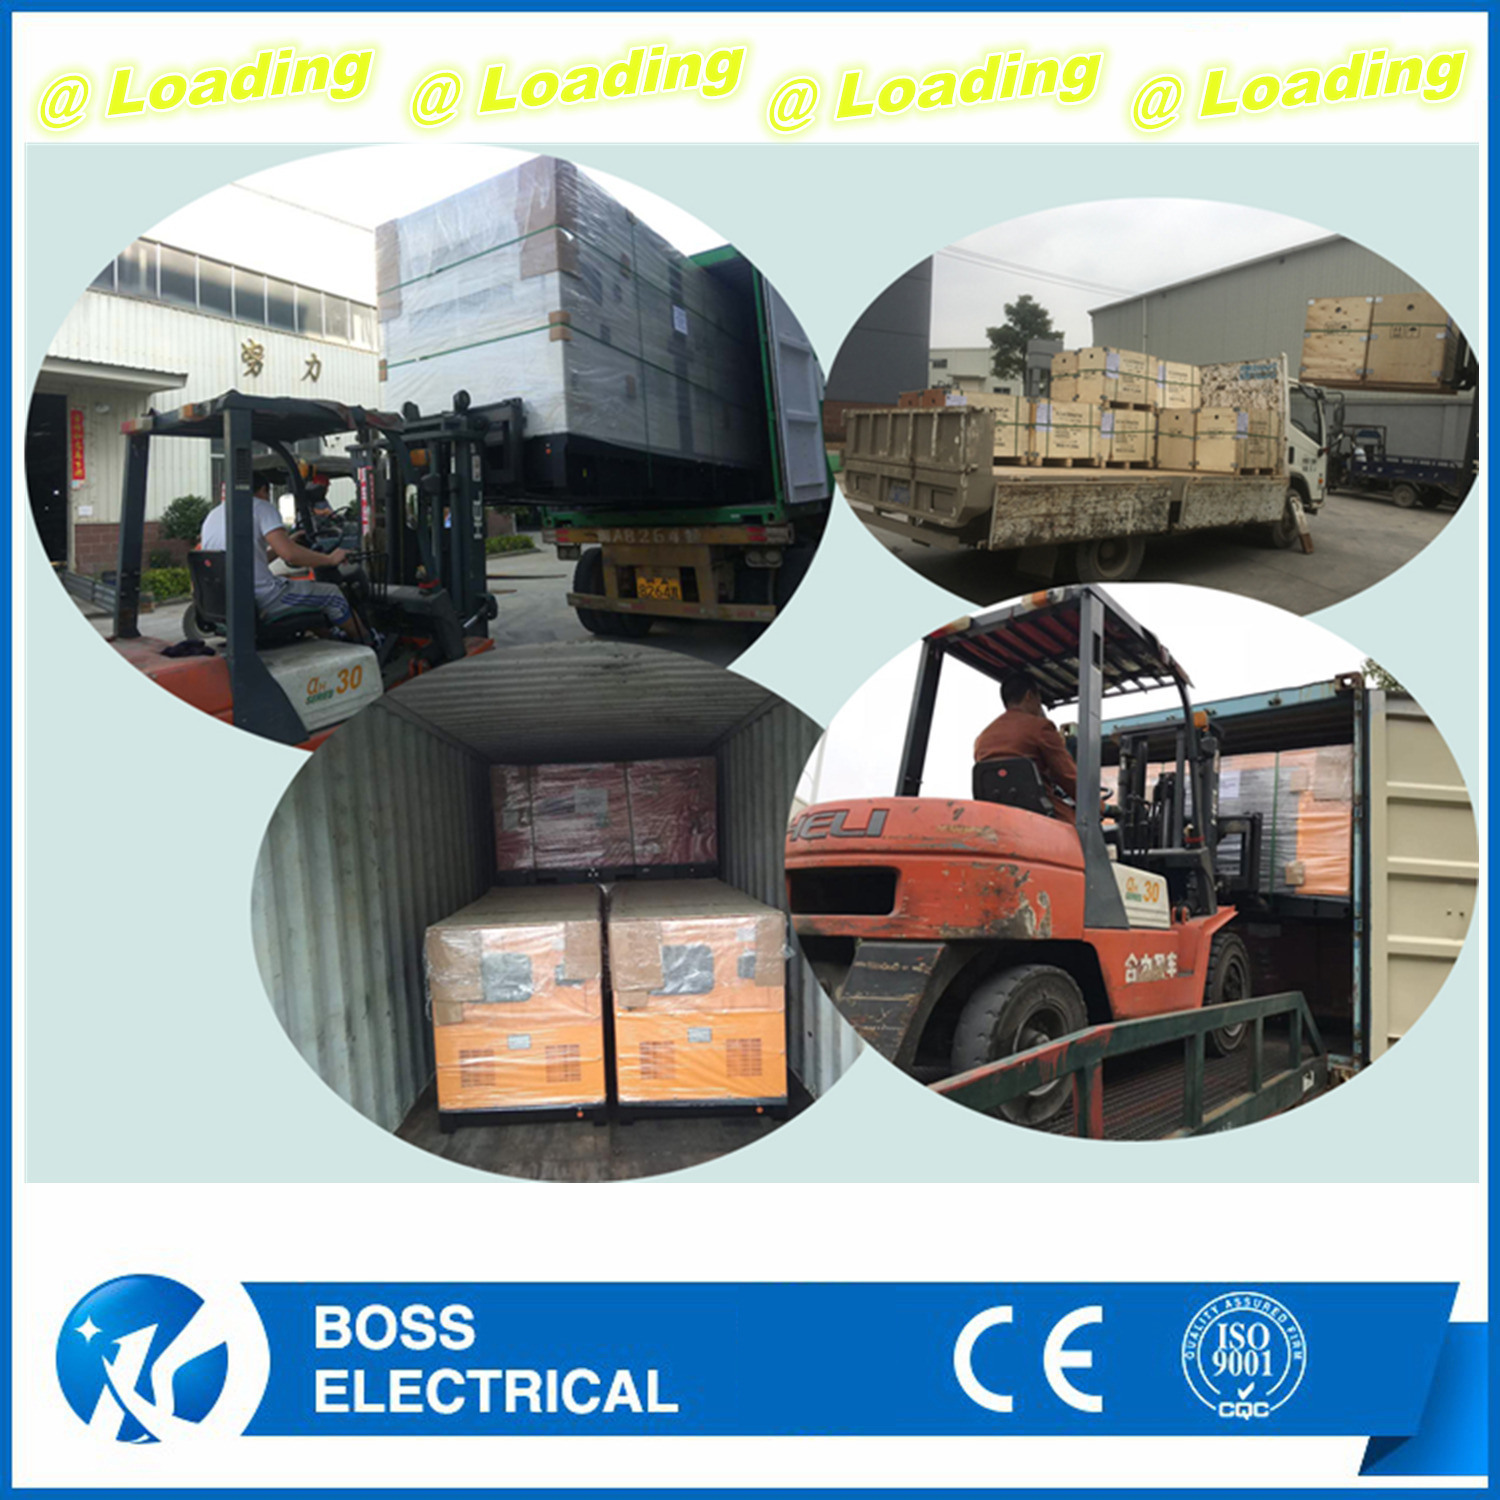 Wholesale 10kw 15kw 20kw 25kw Yangdong Engine Electric Power Diesel Generator with ATS Aisikai